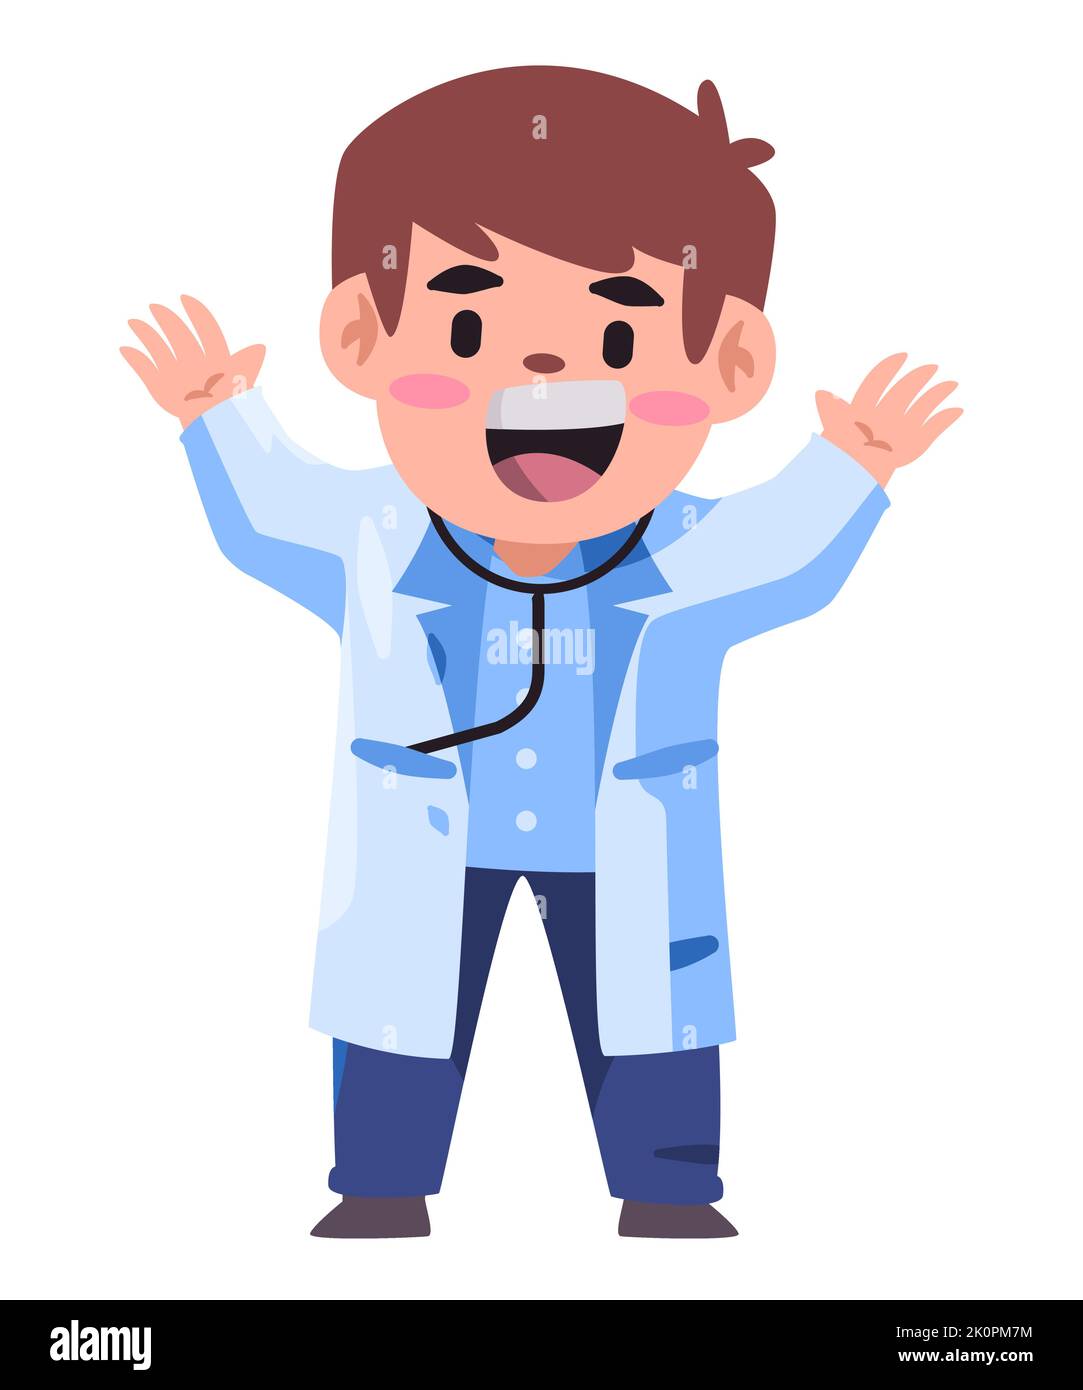 Professional doctor physician kids wearing medical uniform white coat and stethoscope Stock Vector